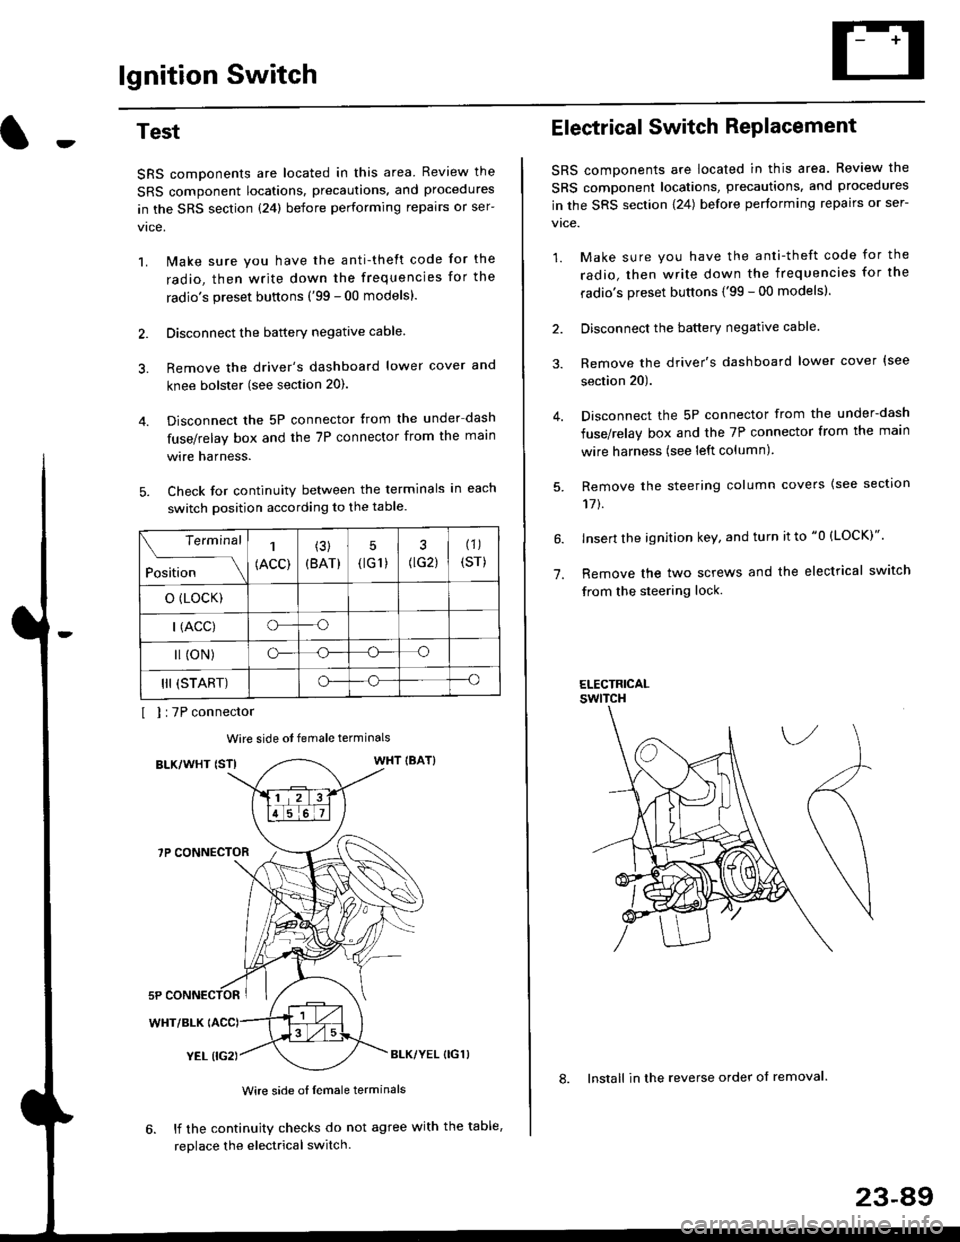 HONDA CIVIC 1996 6.G User Guide lgnition Switch
4.
Test
SRS components are located in this area Review the
SRS component locations. precautions. and procedures
in the SRS section {24} before performing repairs or ser-
1. i/ake sure 